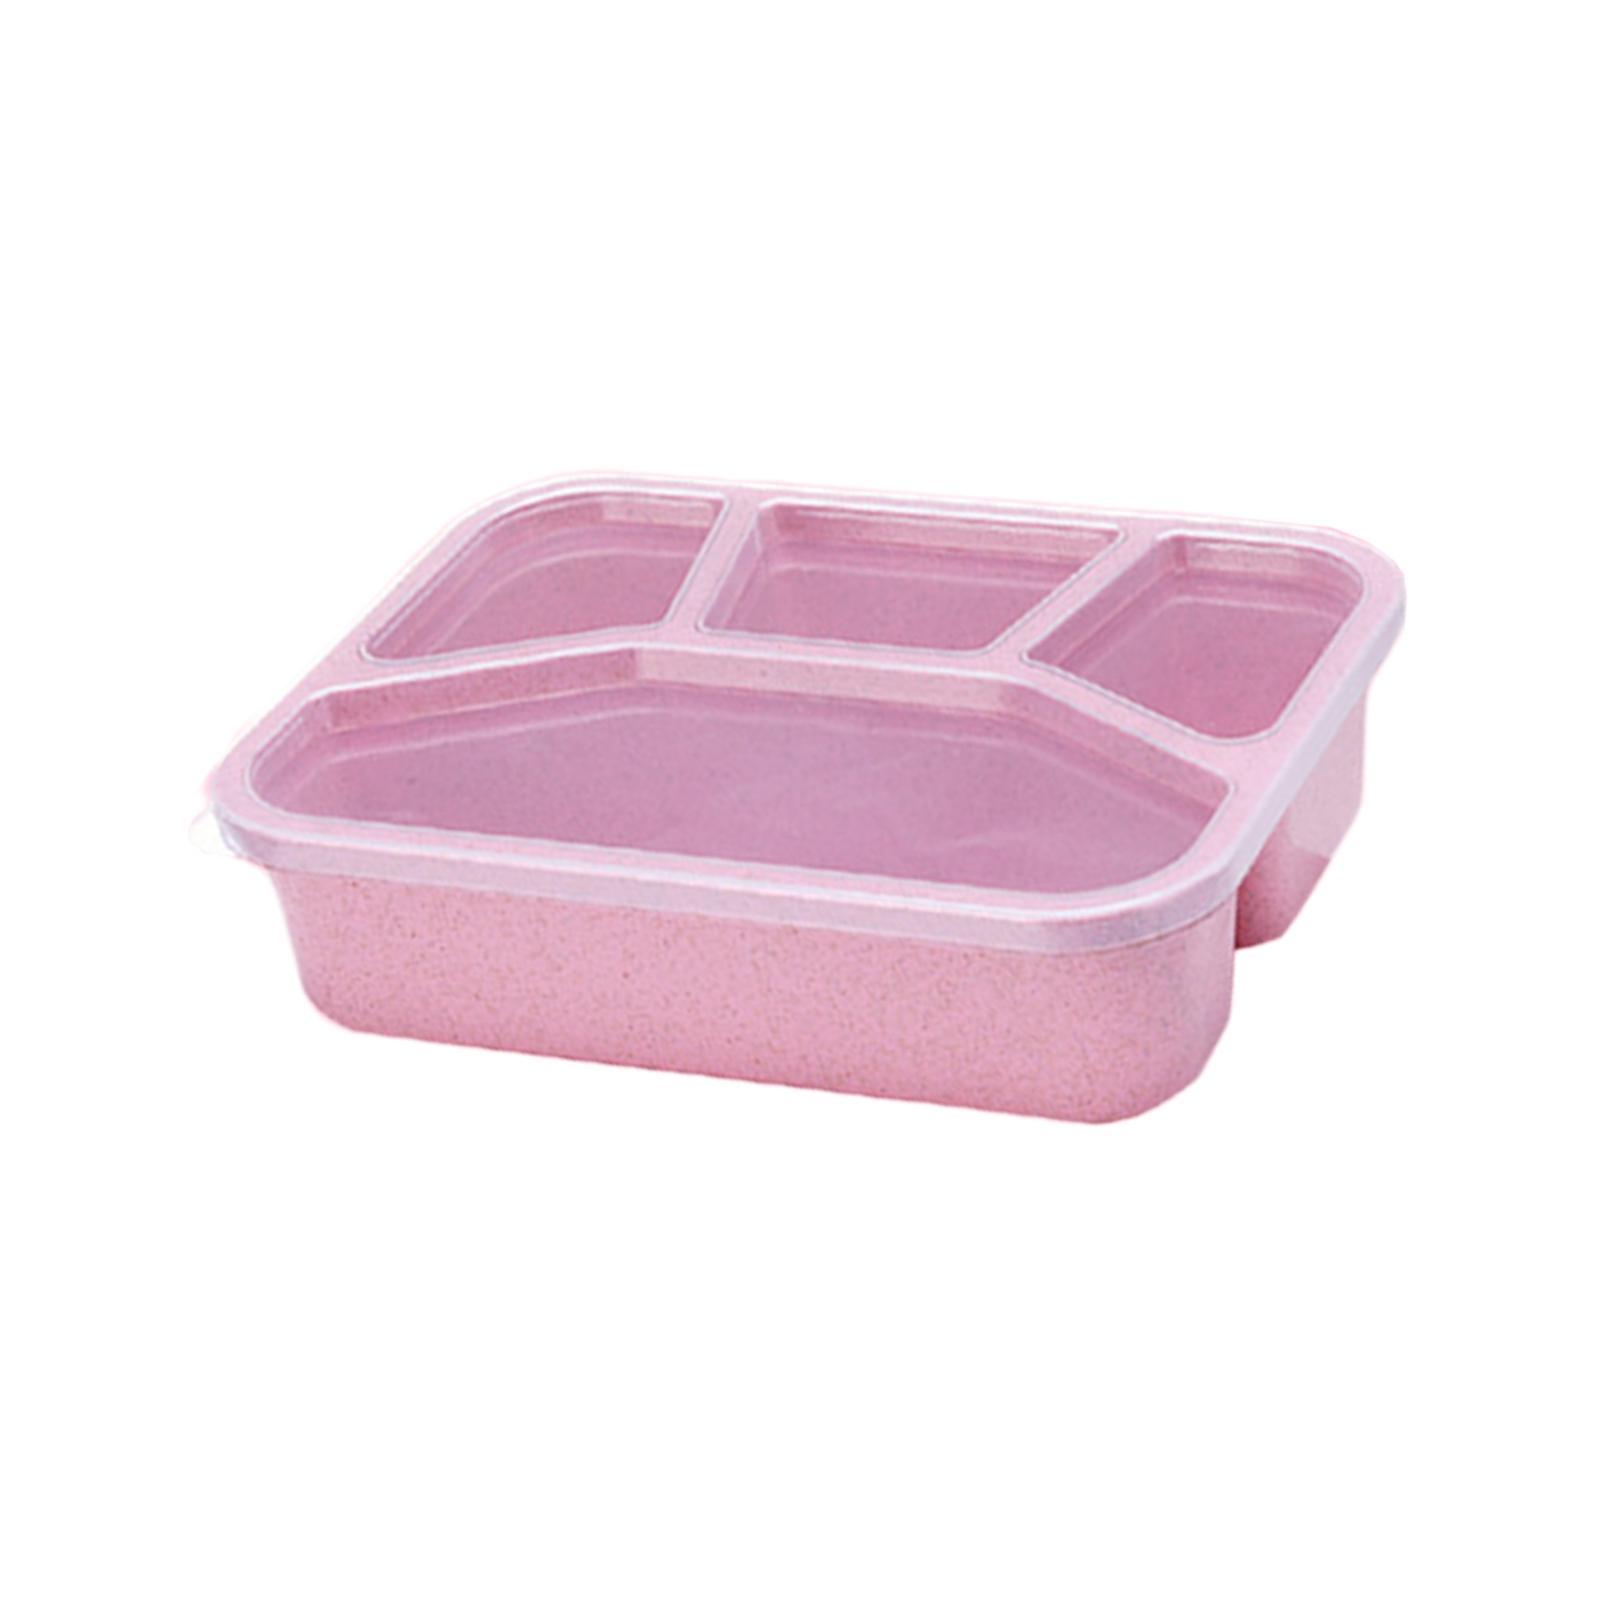 Bento Lunch Box Leakproof Lid Reusable Snack Food Container for Home Kitchen